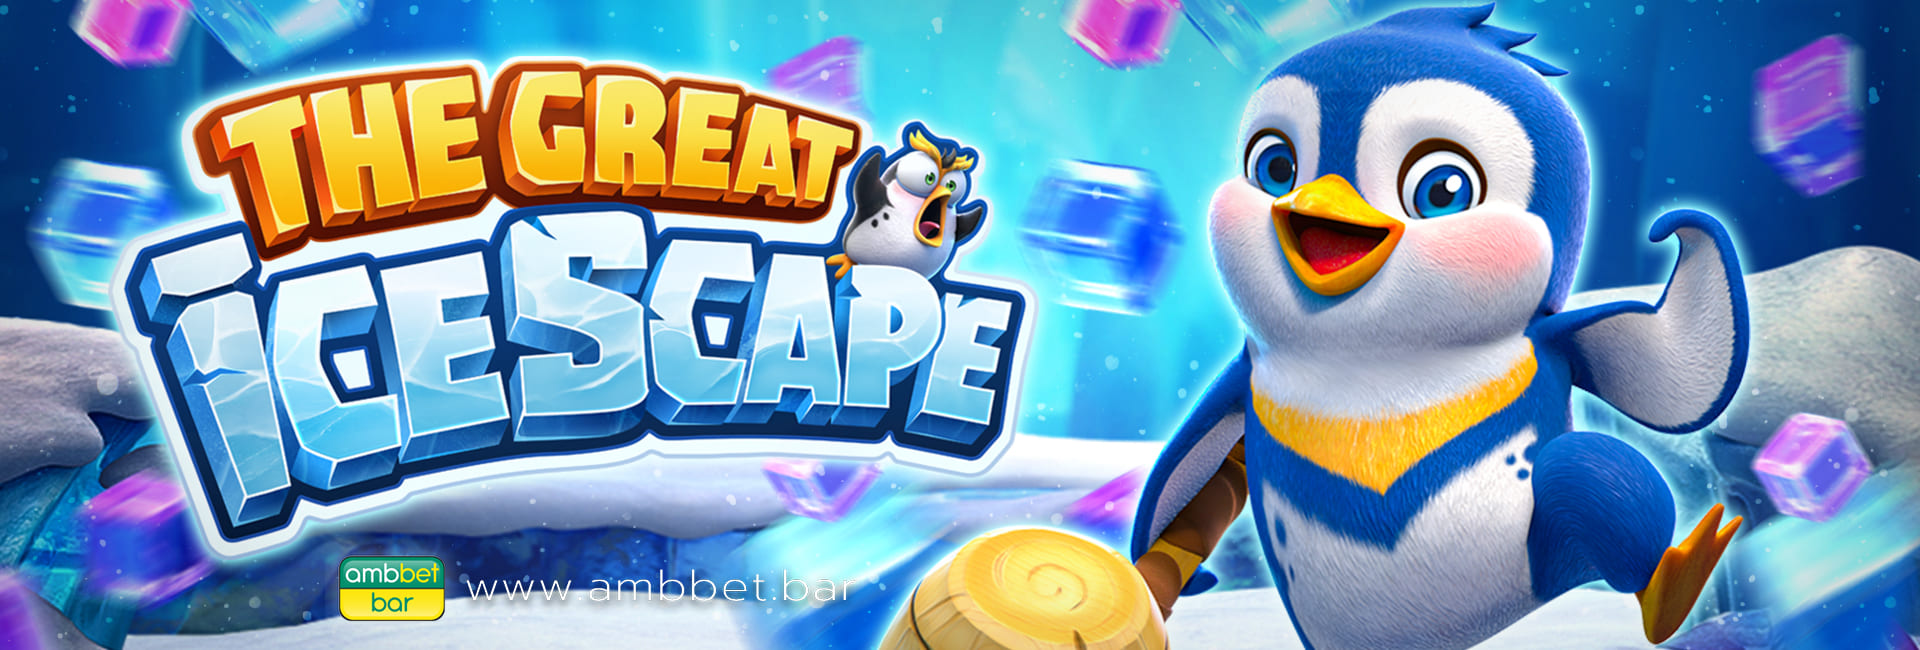 The Great Icescape banner